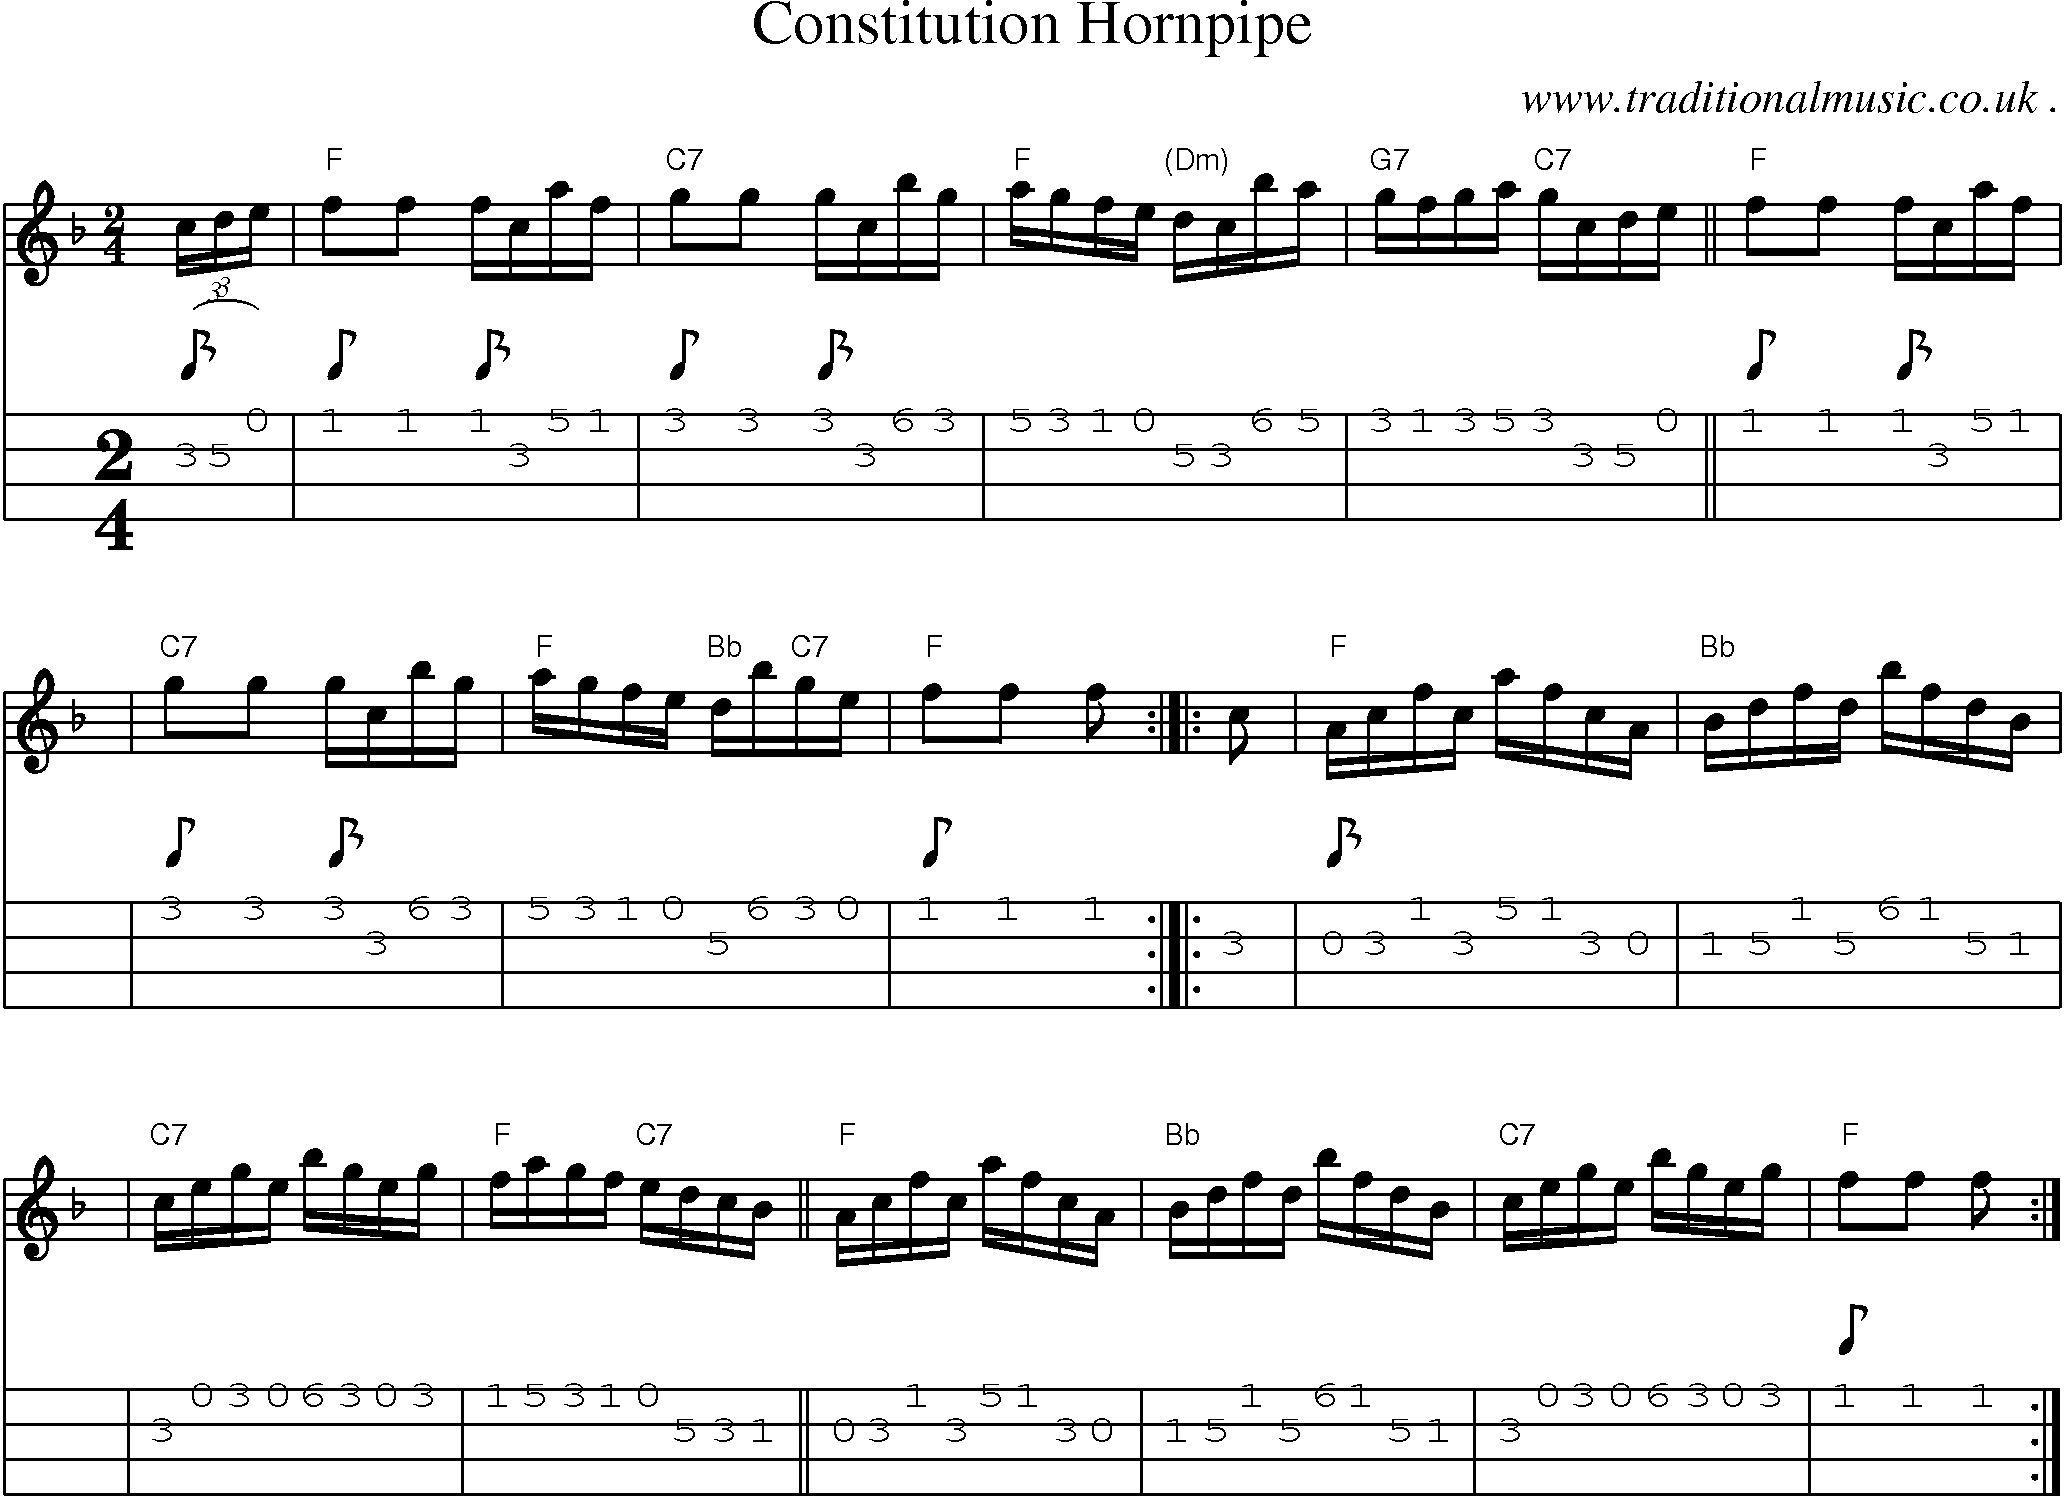 Sheet-music  score, Chords and Mandolin Tabs for Constitution Hornpipe